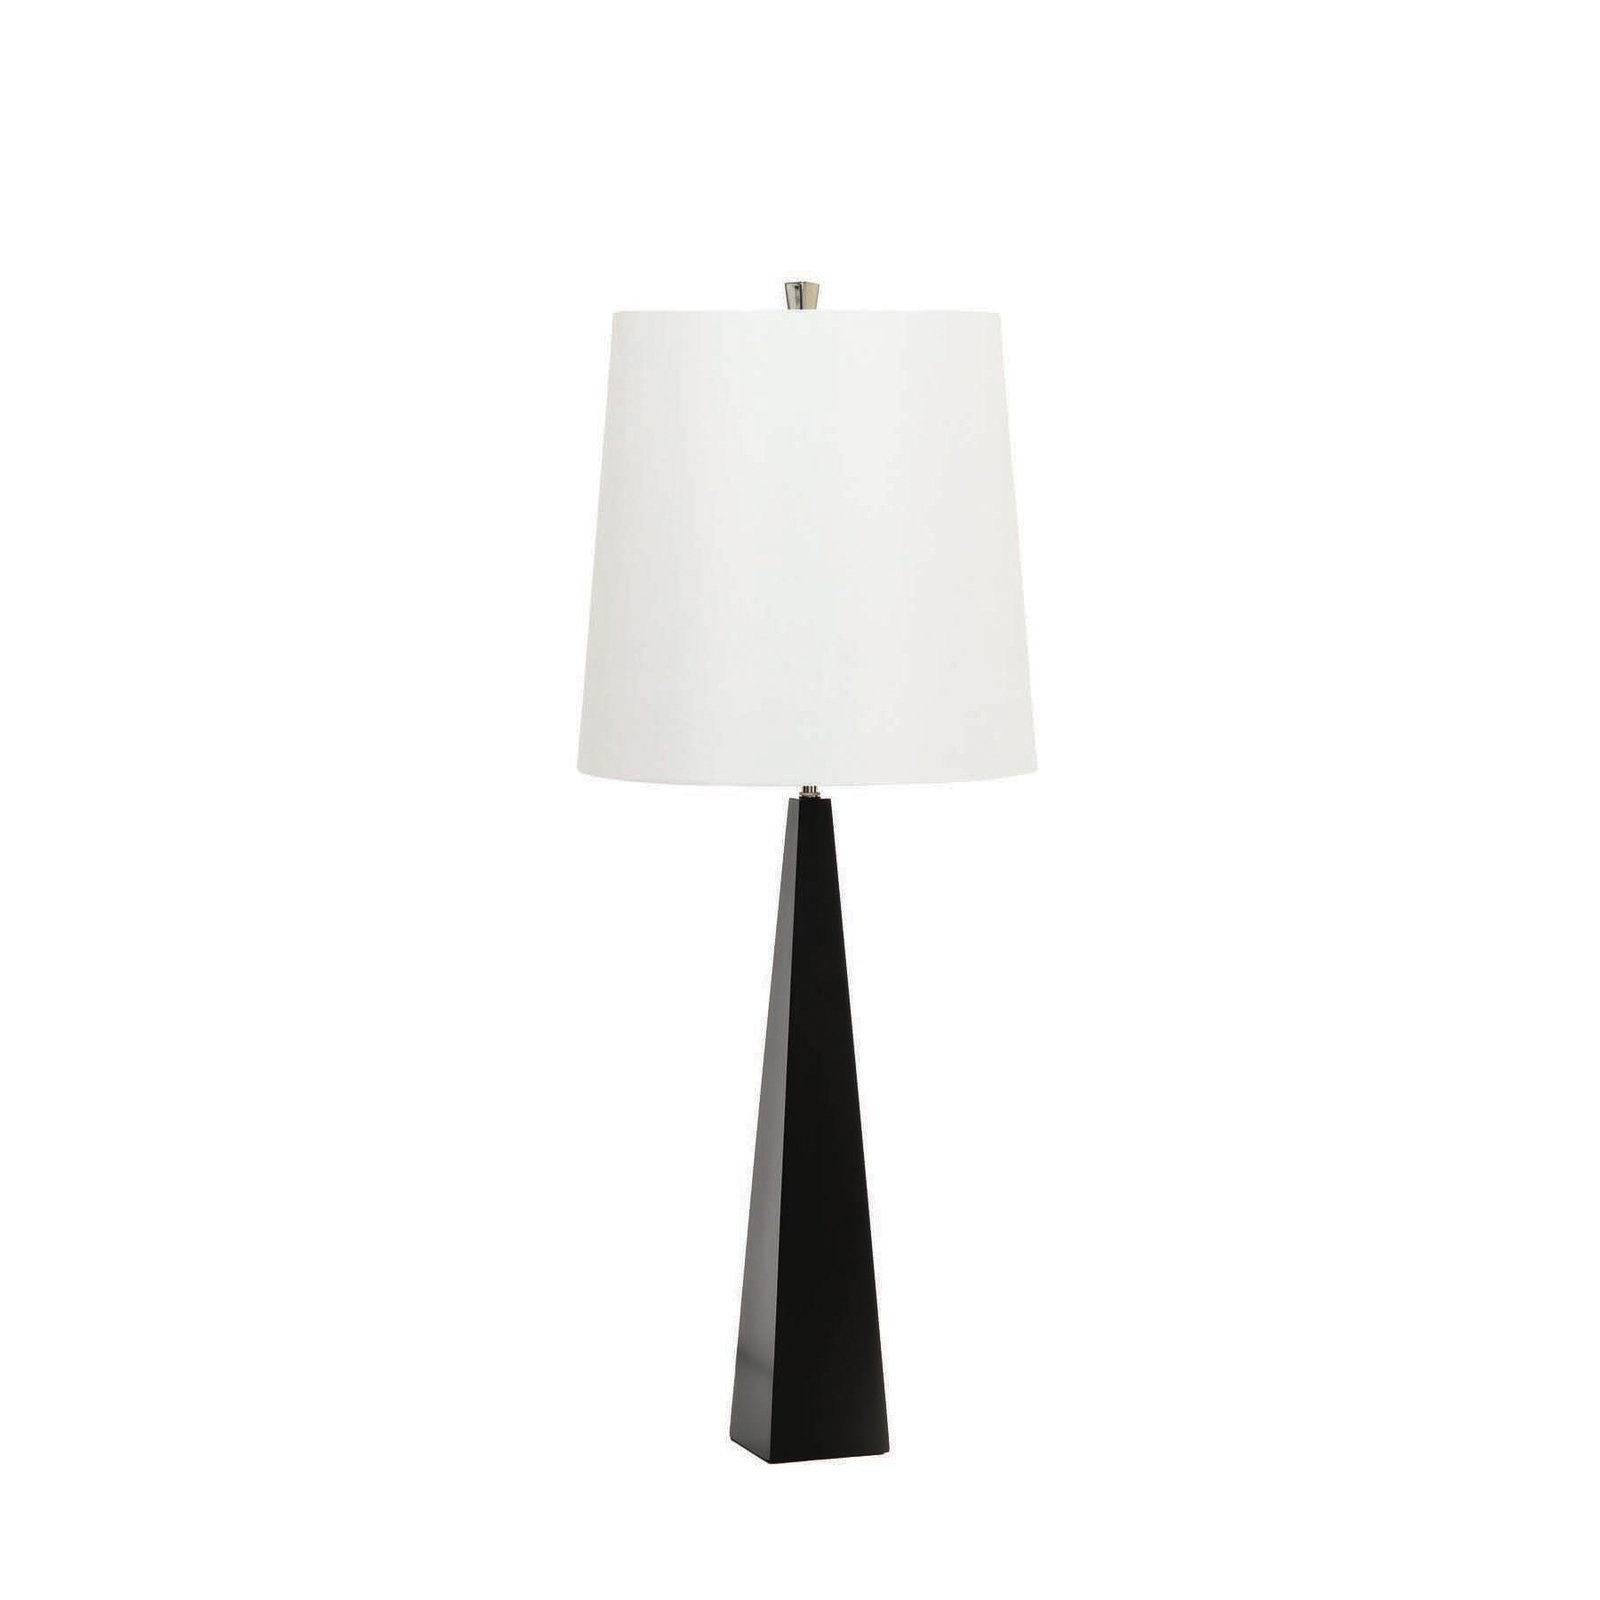 Ascent table lamp, black, white lampshade